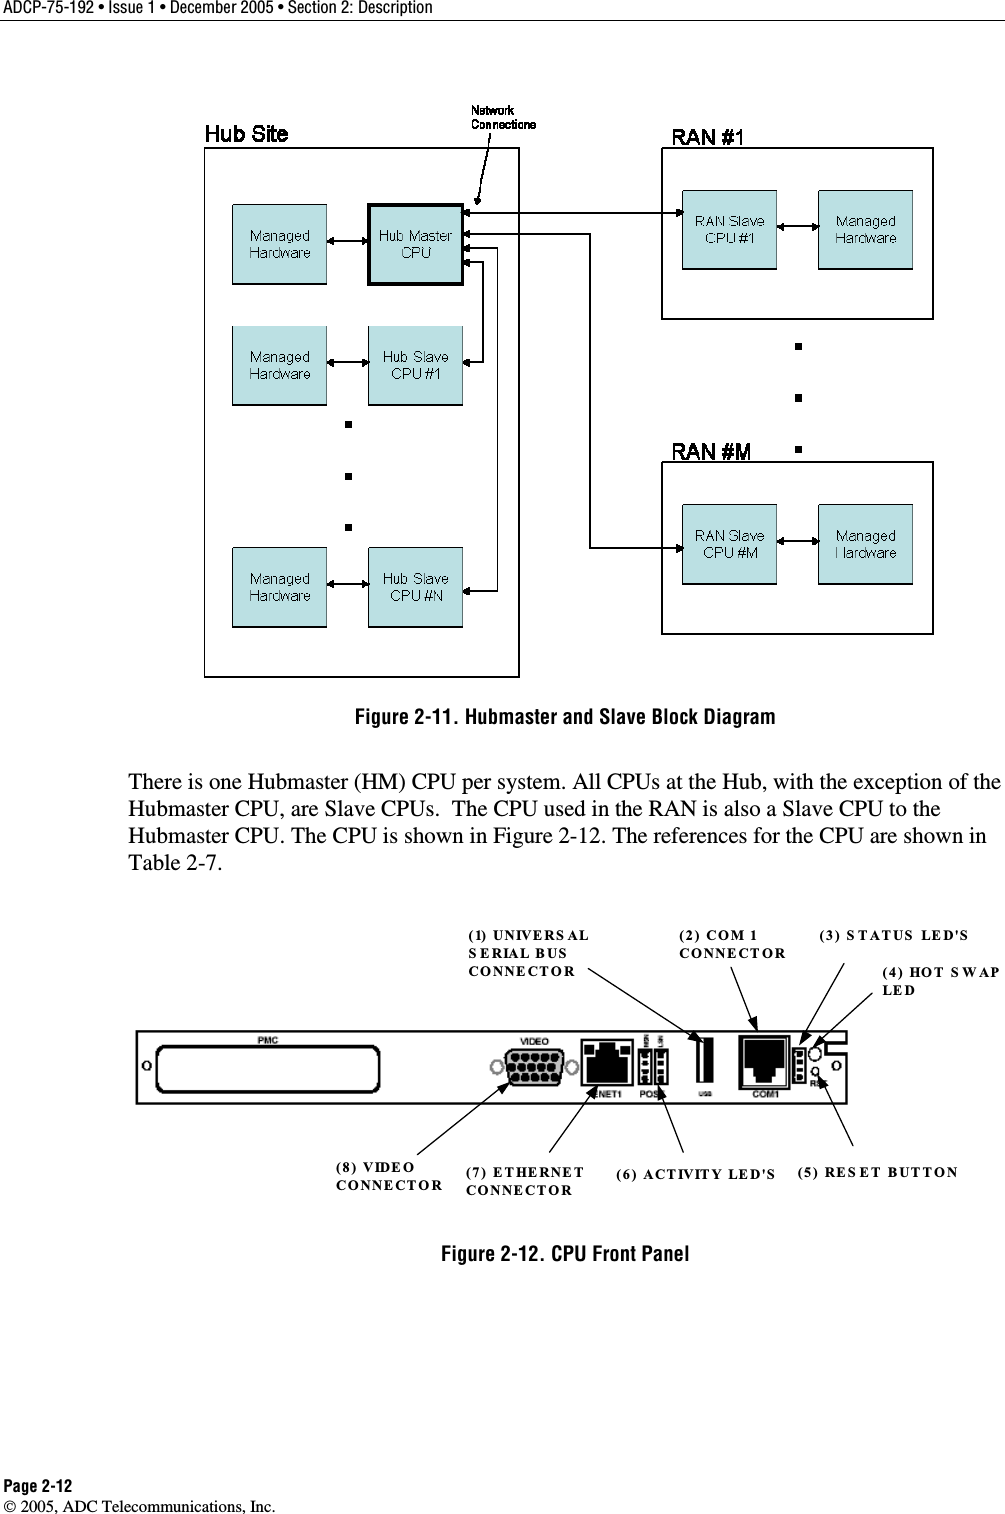 ADCP-75-192 • Issue 1 • December 2005 • Section 2: Description Page 2-12  2005, ADC Telecommunications, Inc.  Figure 2-11. Hubmaster and Slave Block Diagram There is one Hubmaster (HM) CPU per system. All CPUs at the Hub, with the exception of the Hubmaster CPU, are Slave CPUs.  The CPU used in the RAN is also a Slave CPU to the Hubmaster CPU. The CPU is shown in Figure 2-12. The references for the CPU are shown in Table 2-7.  (7) ETHERNET CONNECTOR(1) UNIVERS AL SERIAL BUS CONNECTOR(6) ACTIVITY LED&apos;S(2) COM 1 CONNECTOR(5) RES ET BUTTON(4) HOT S WAP LED(8) VIDEO CONNECTOR(3) S TATUS  LED&apos;S Figure 2-12. CPU Front Panel 